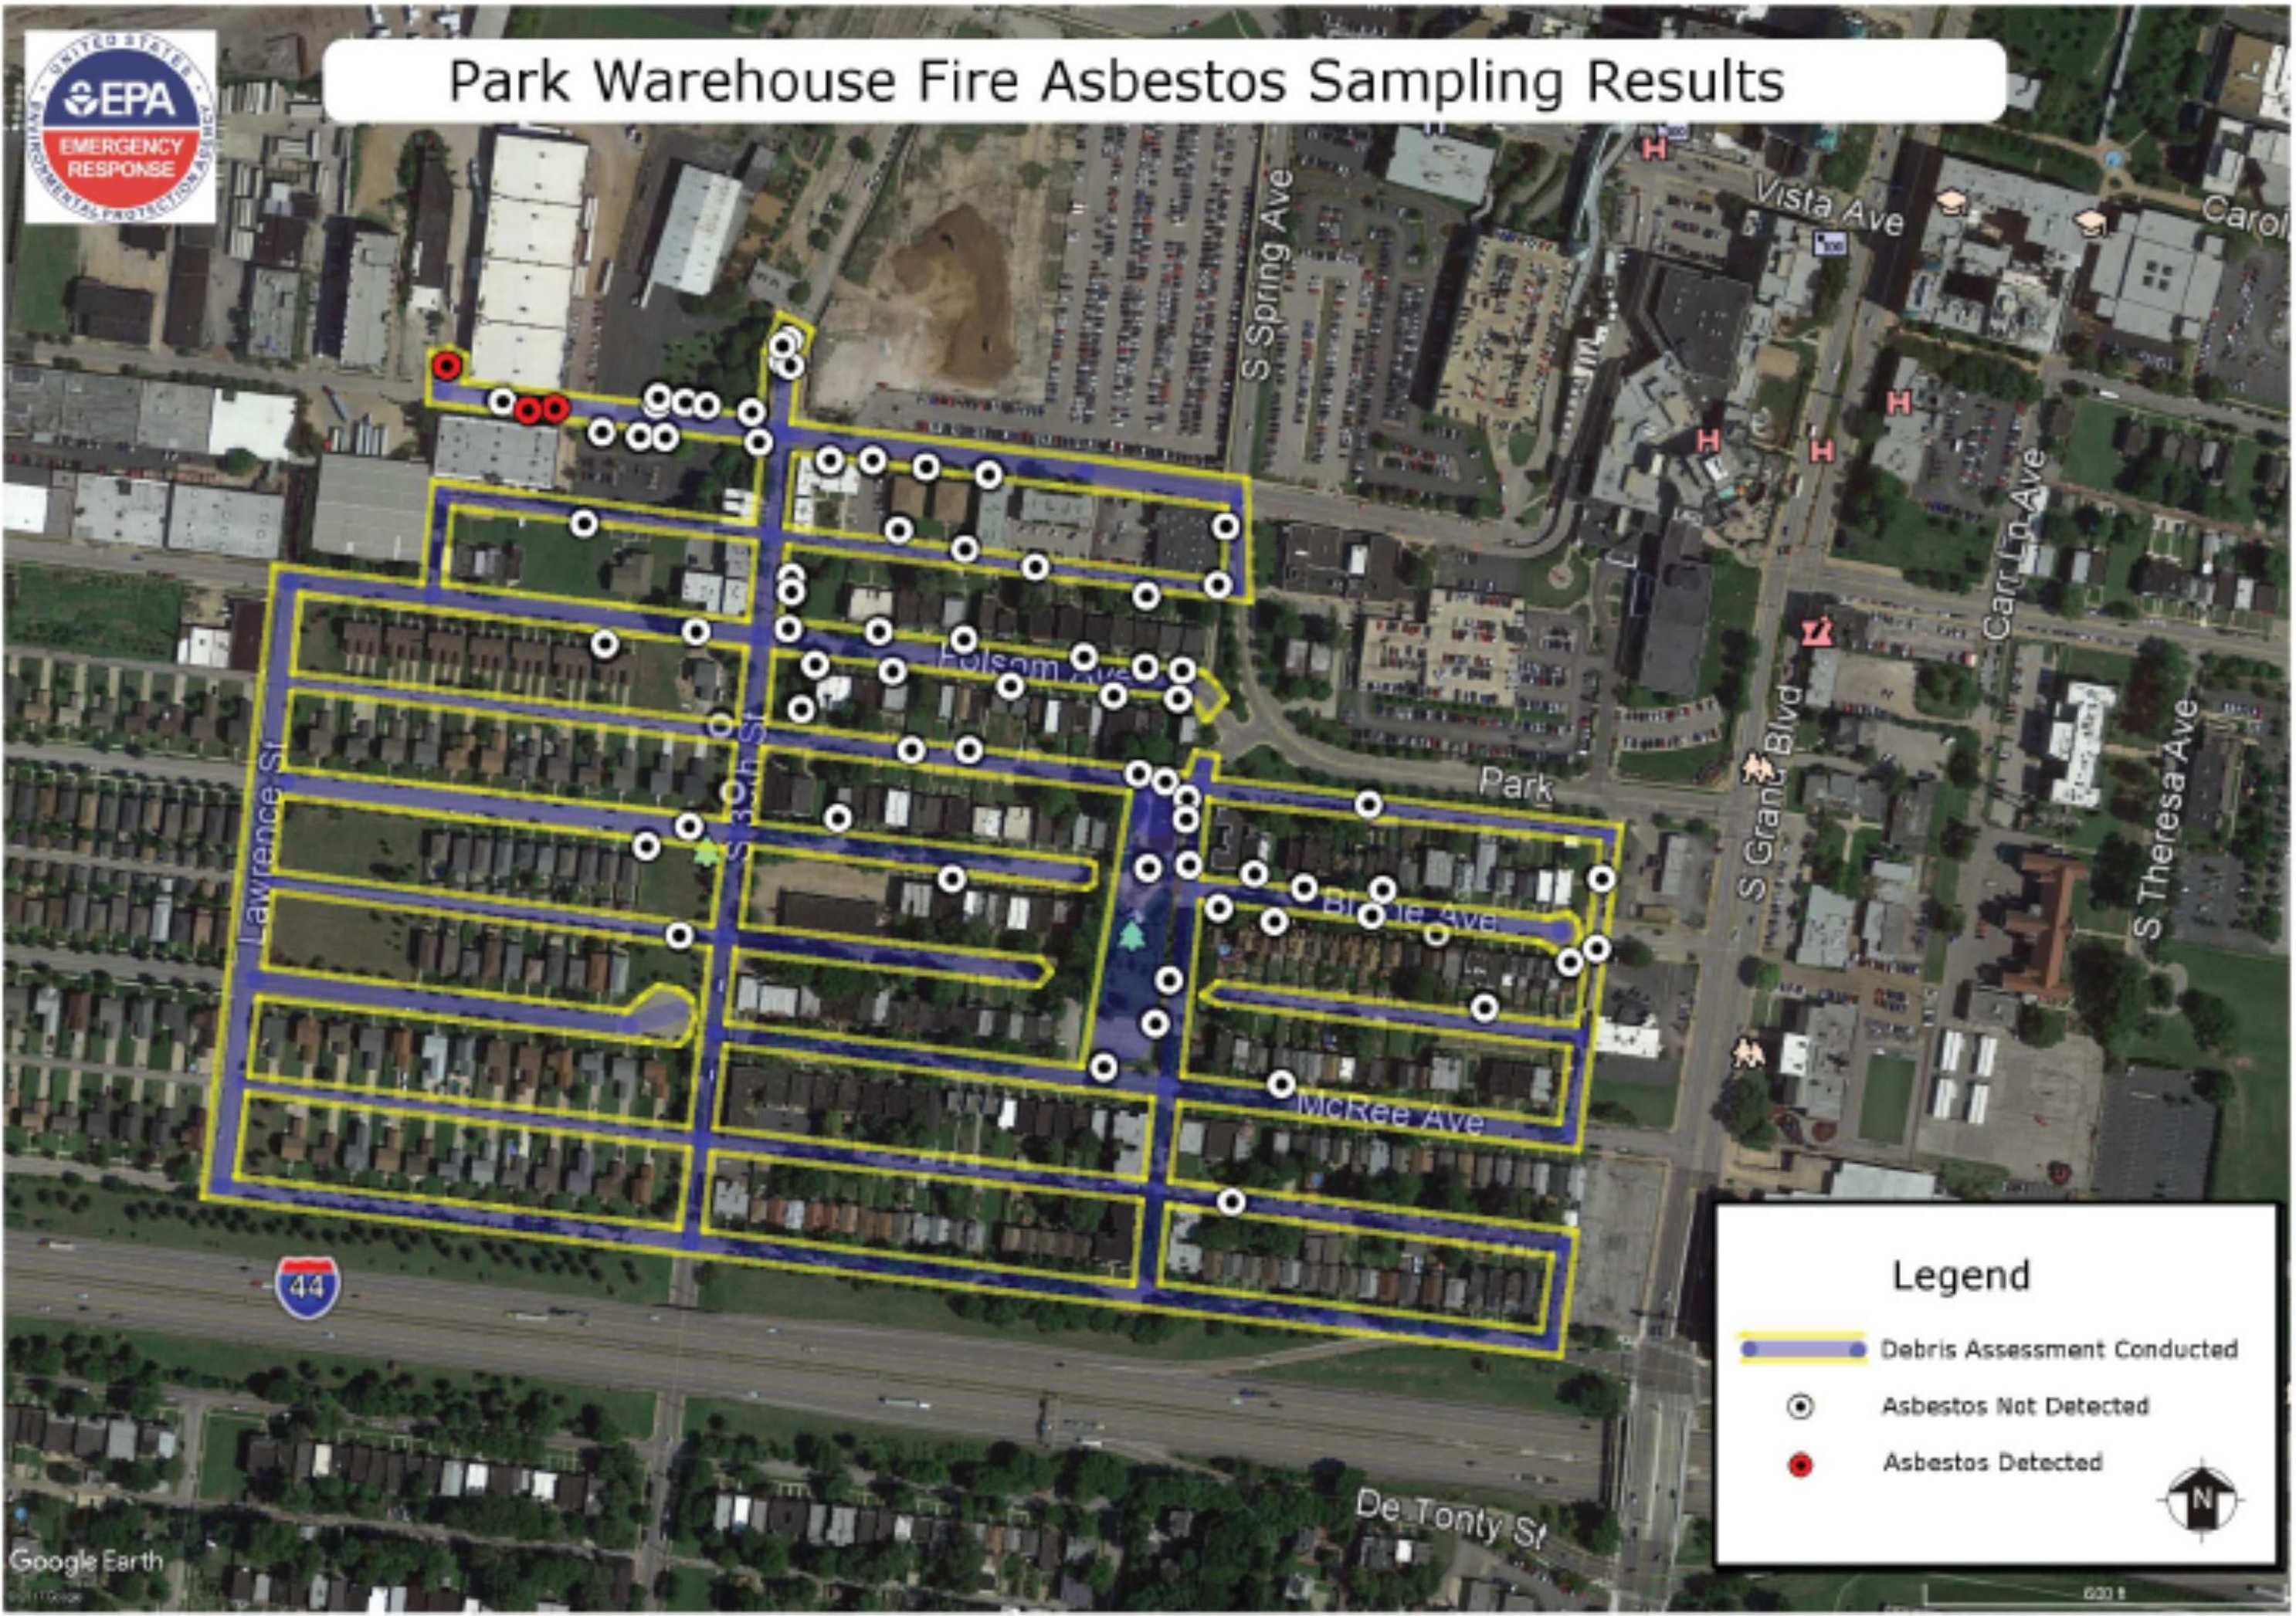 EPA Testing sites from 3937 Park Avenue warehouse fire